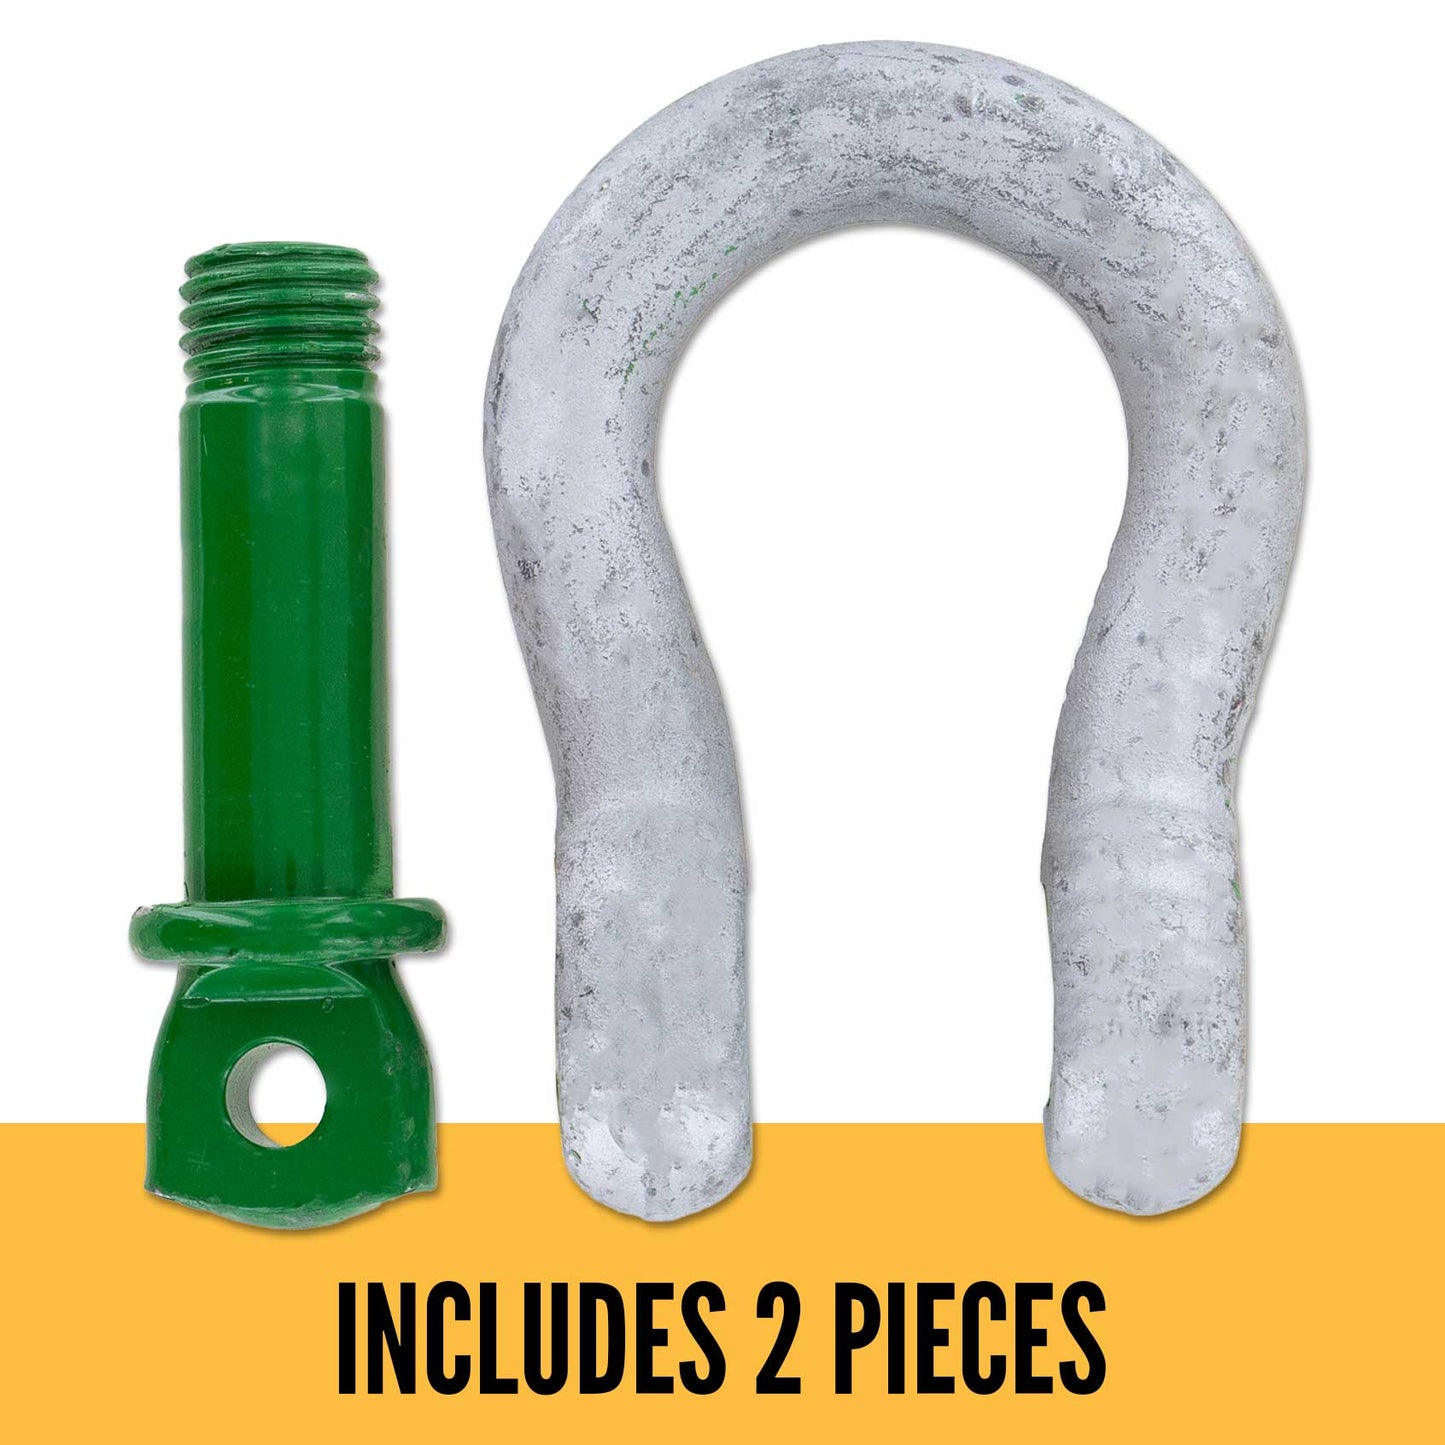 1-3/8" Van Beest Green Pin® Screw Pin Anchor Shackle | G-4161 - 13.5 Ton parts of a shackle